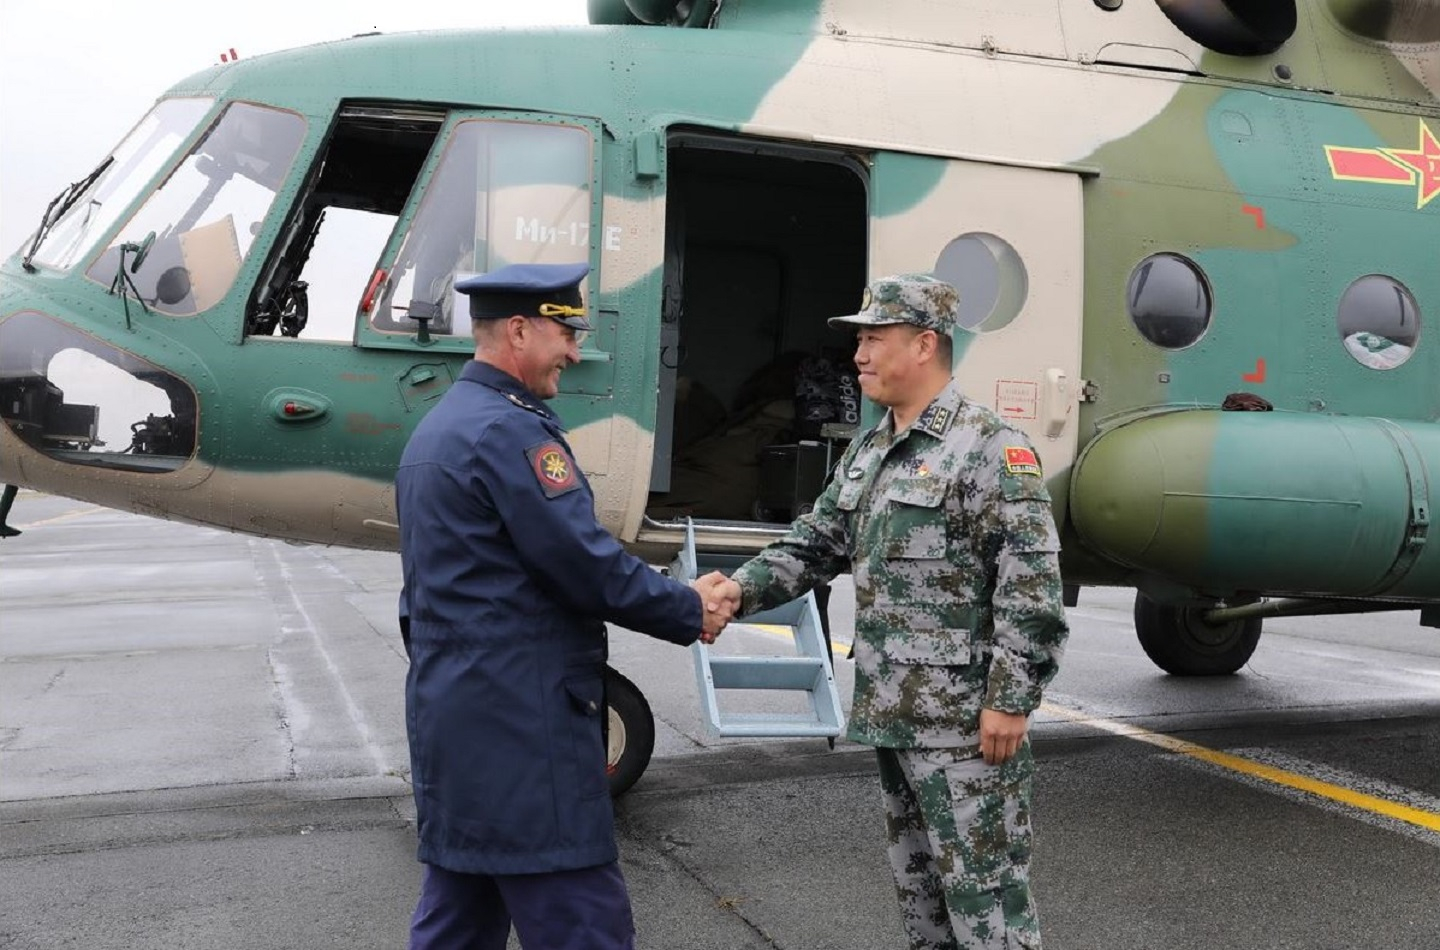 A Russian and a Chinese officer are shaking hands in front of a Chinese helicopter.